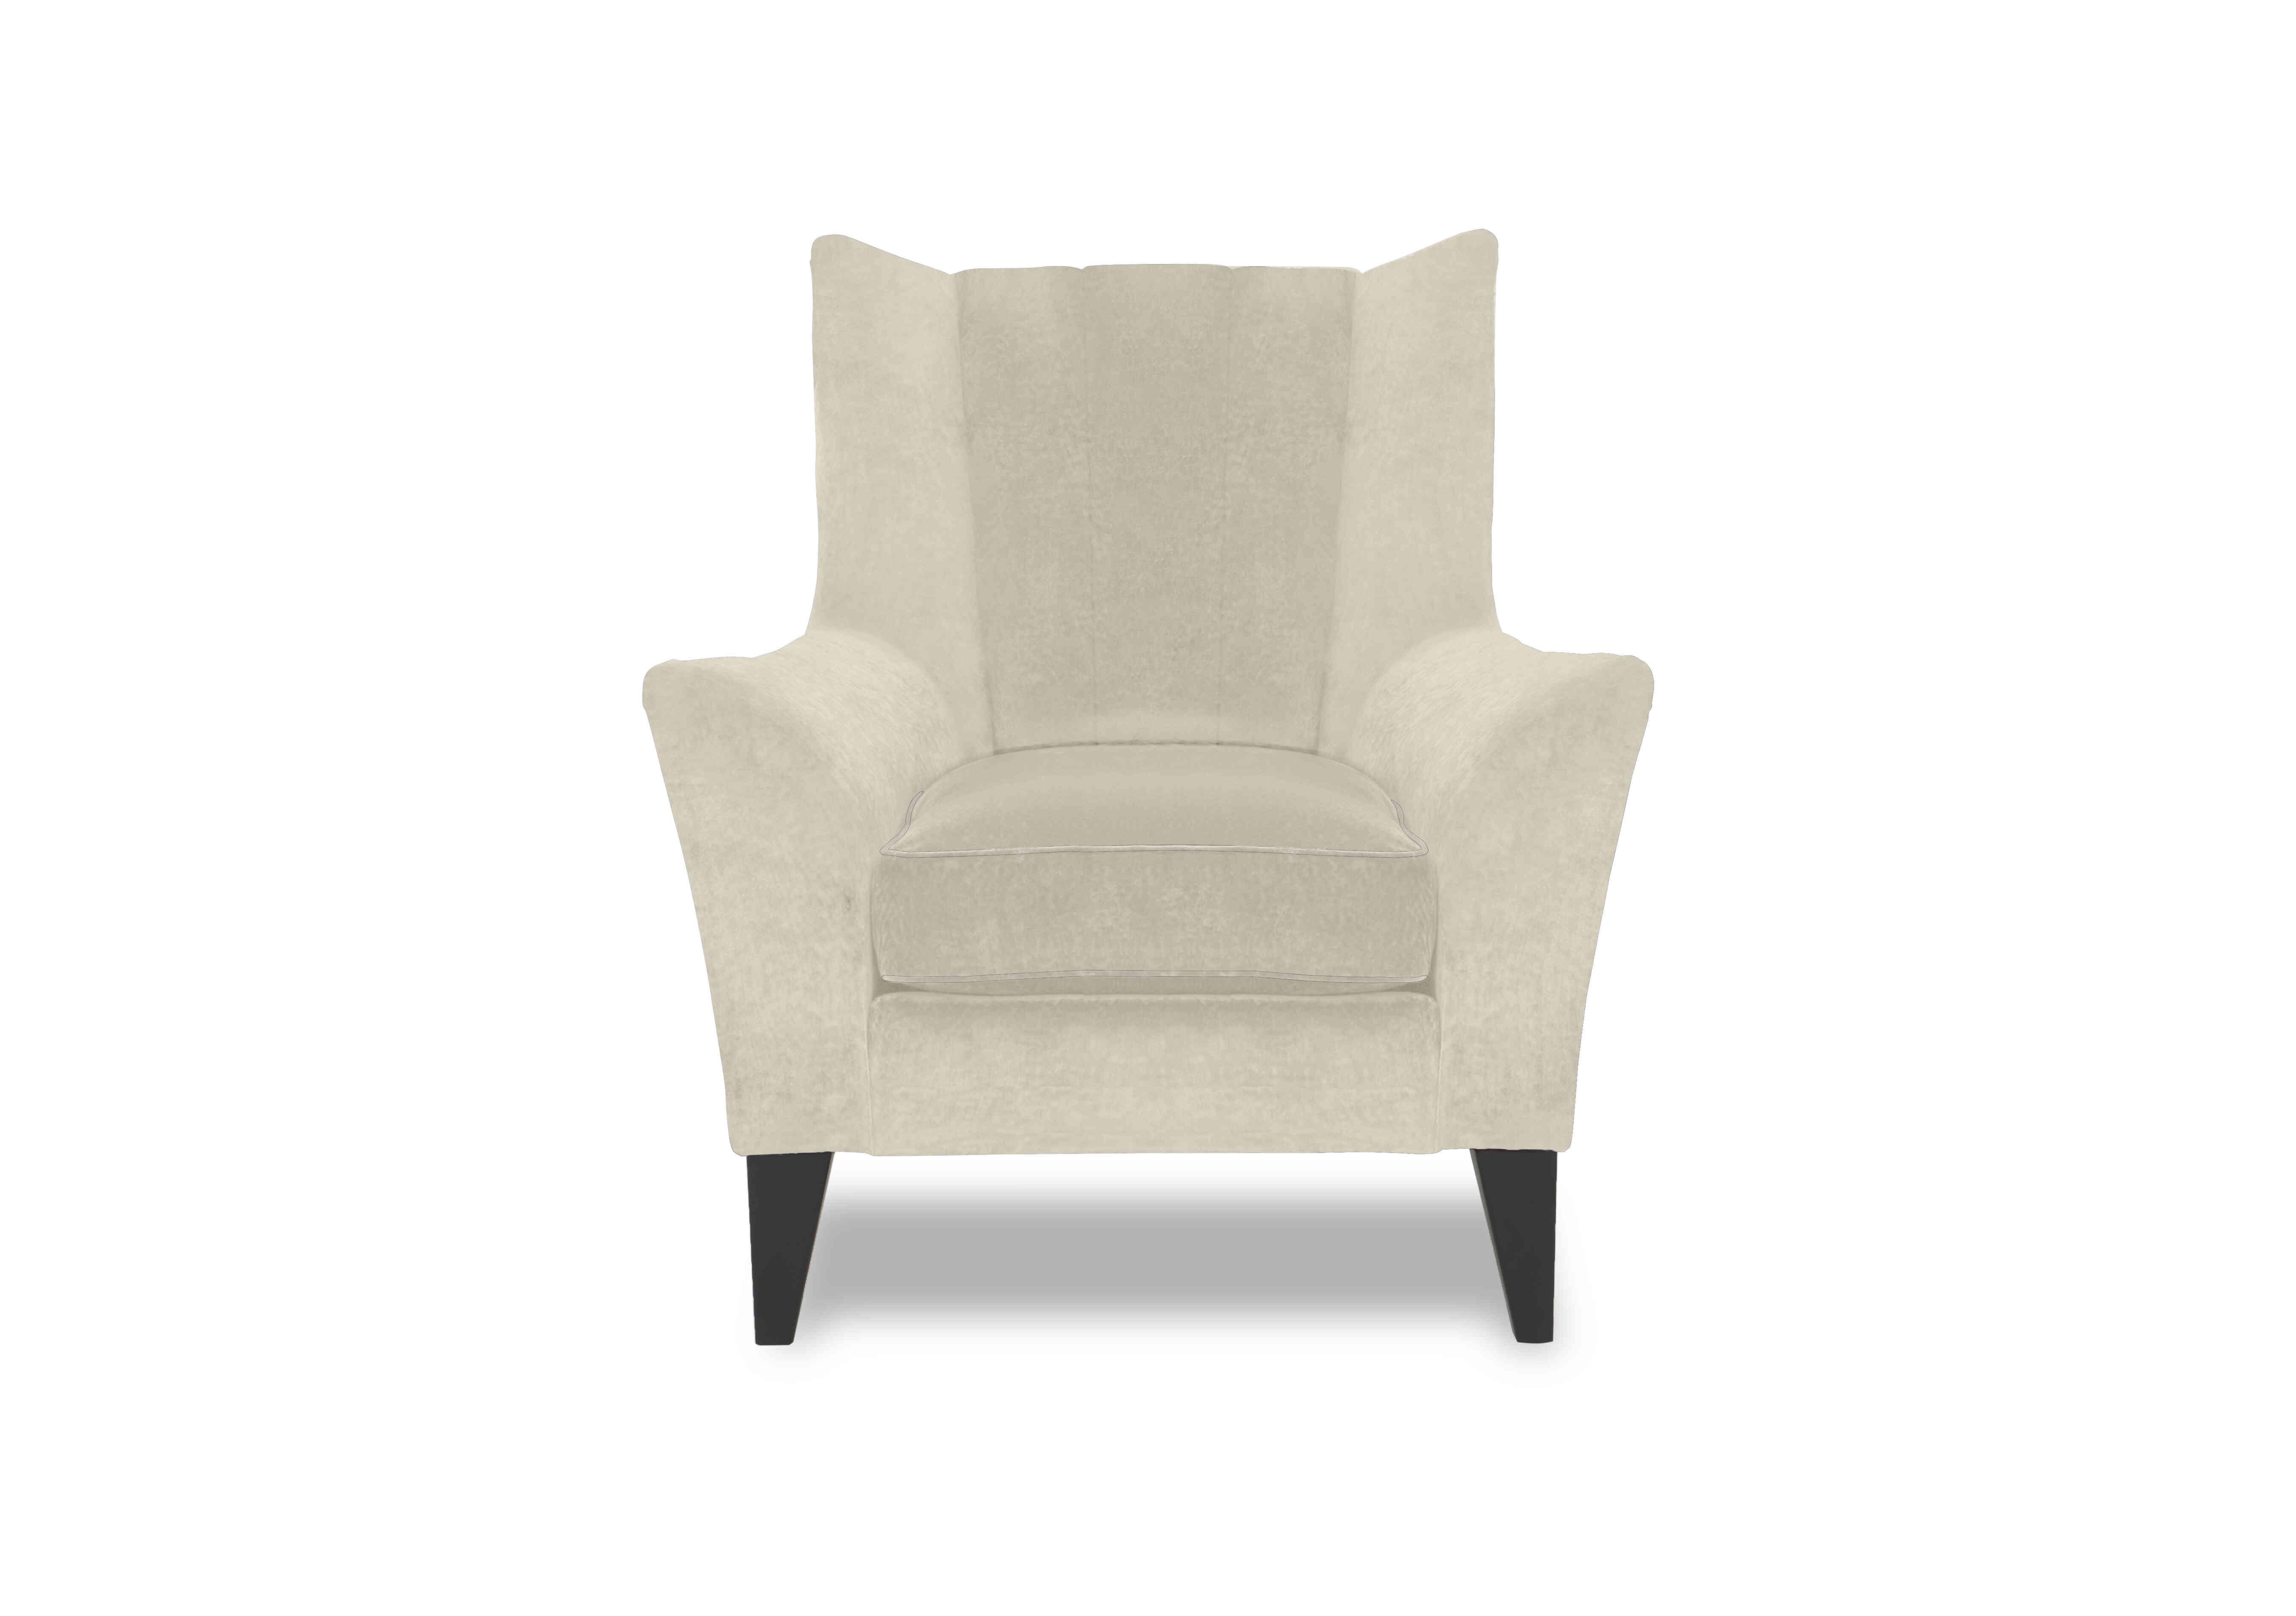 Modern Classics Fluted Chair in Remini Pebble Sp Mf on Furniture Village